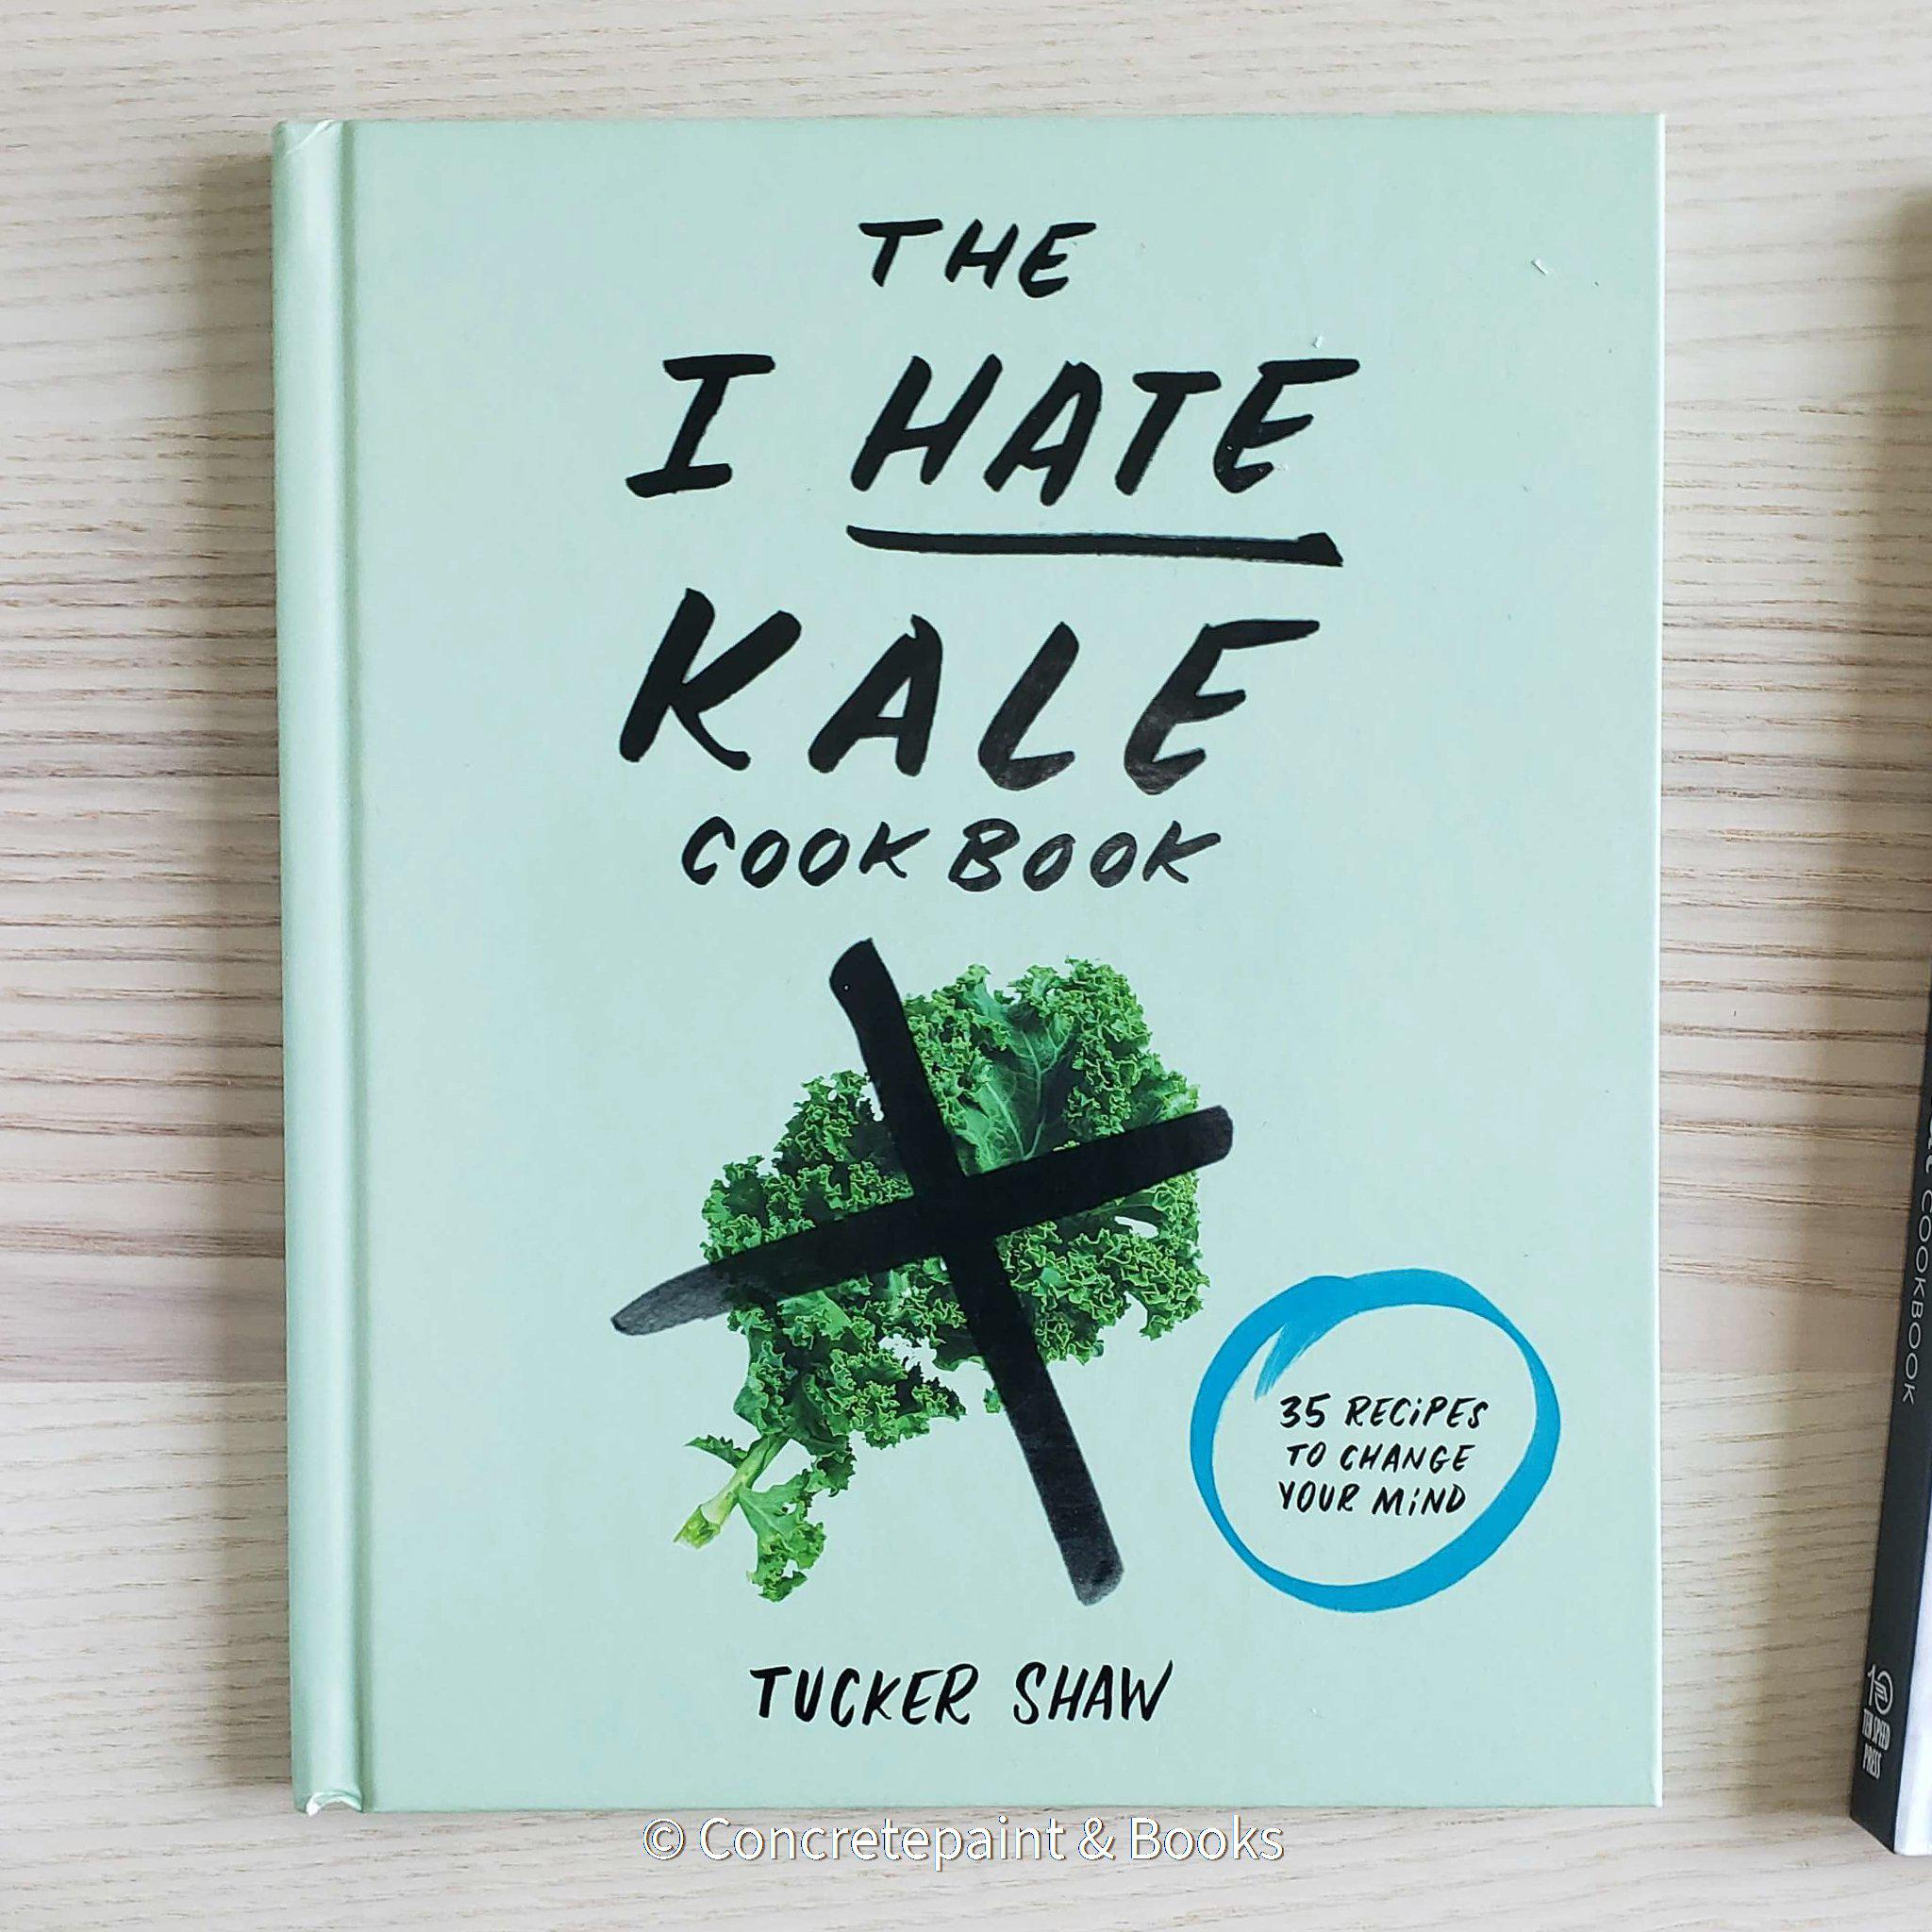 The I hate kale hardcover cookbook by tucker shaw with mint green cover